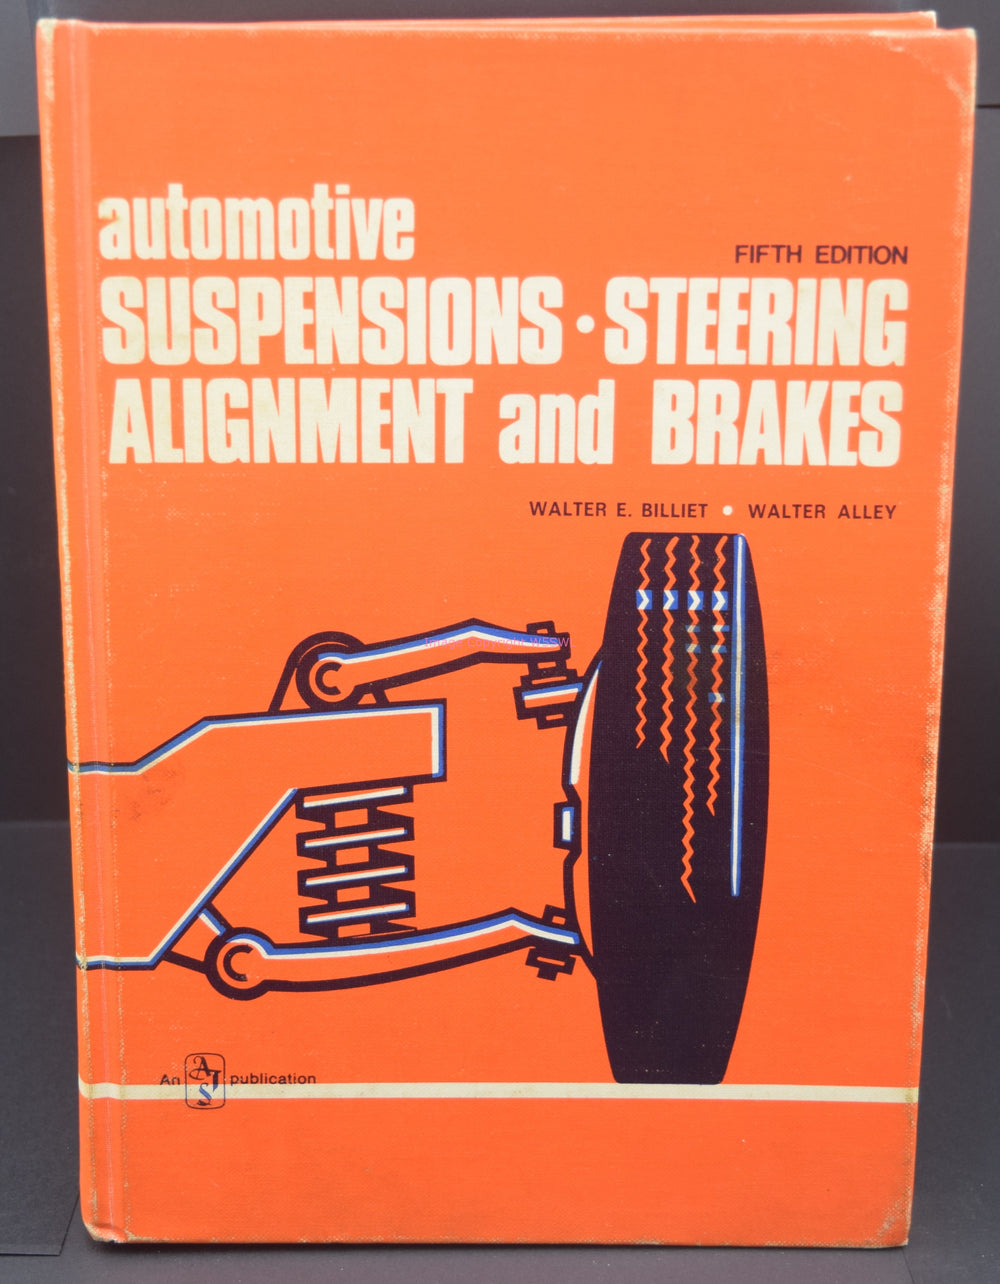 Automotive Suspensions Steering Alignment and Brakes 5th Edition - Dave's Hobby Shop by W5SWL